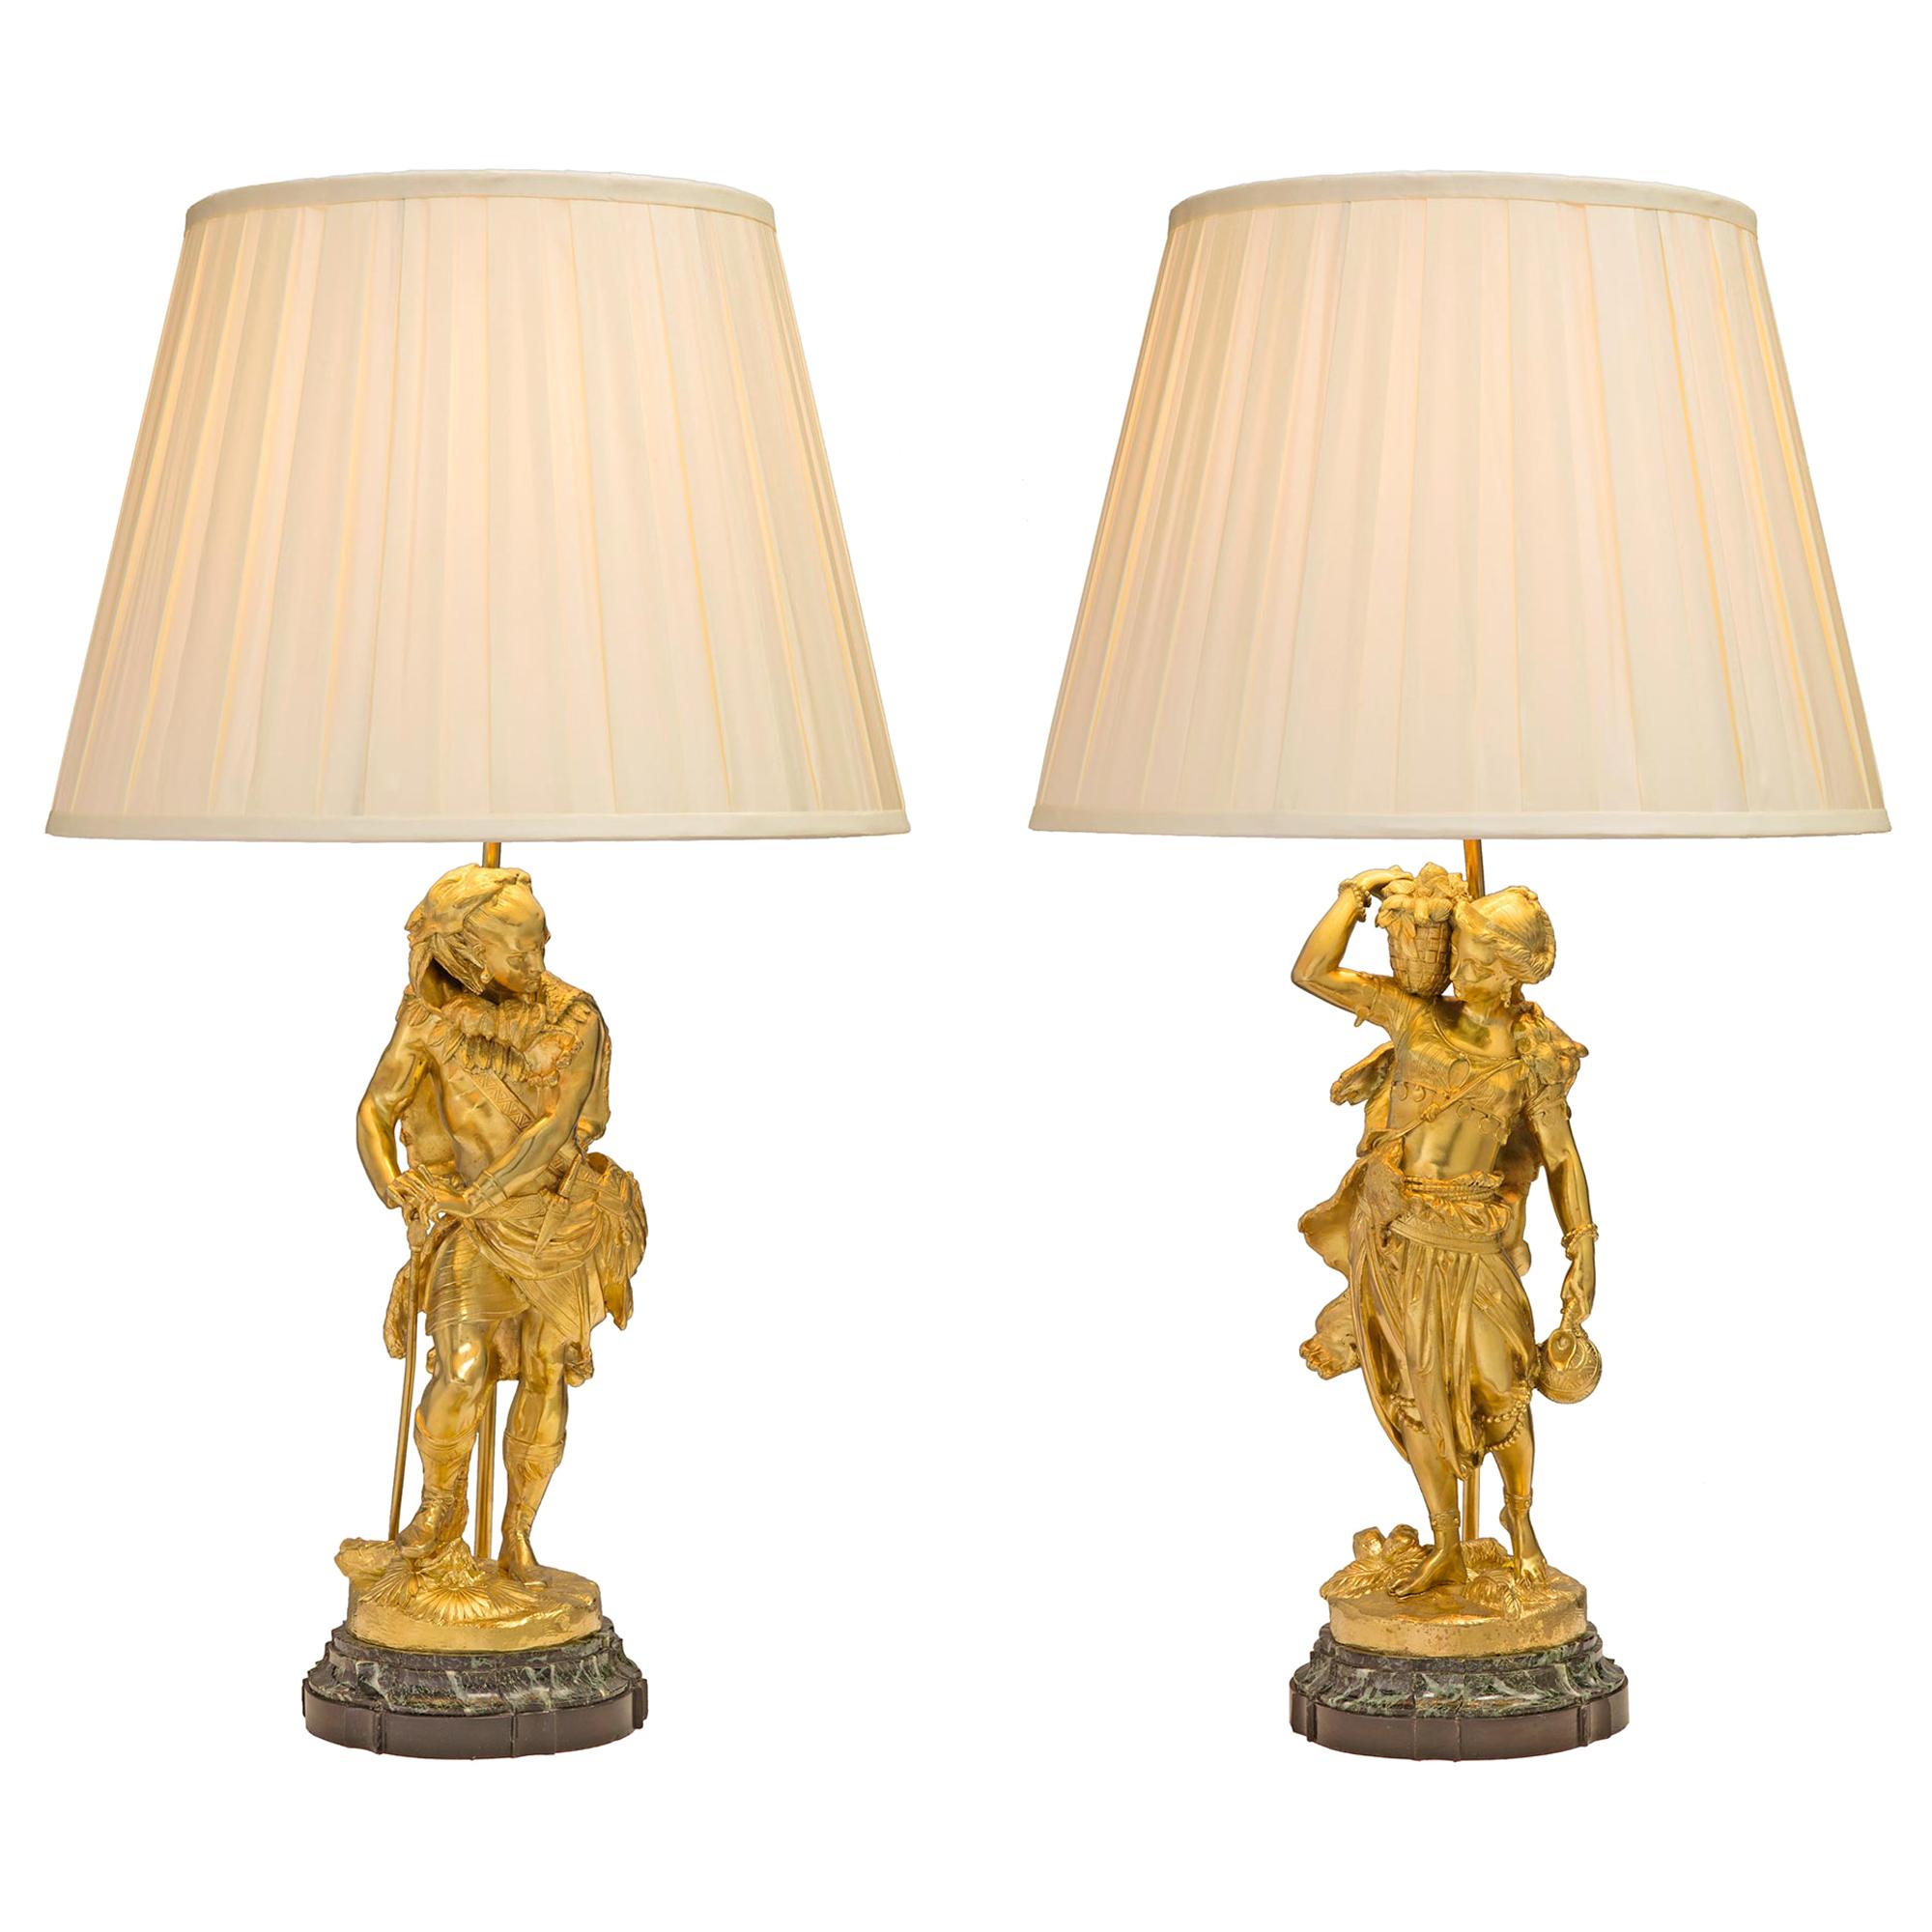 Pair of French 19th Century Belle Époque Period Statues Mounted into Lamps For Sale